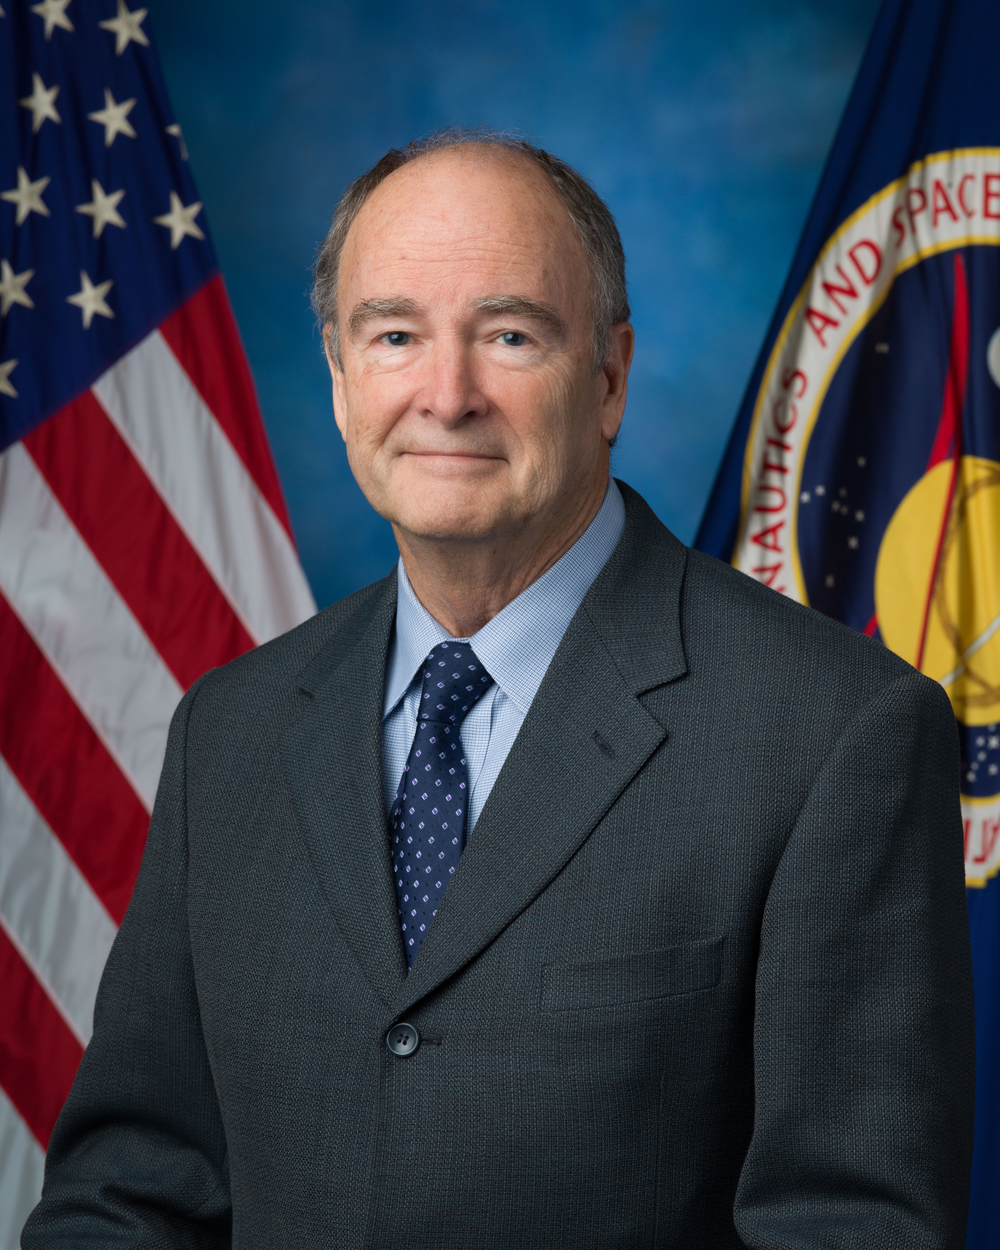 A person wearing a black suit and blue polka dot tie smiles in front of a blue background and a U.S. flag (left) and NASA flag (right).